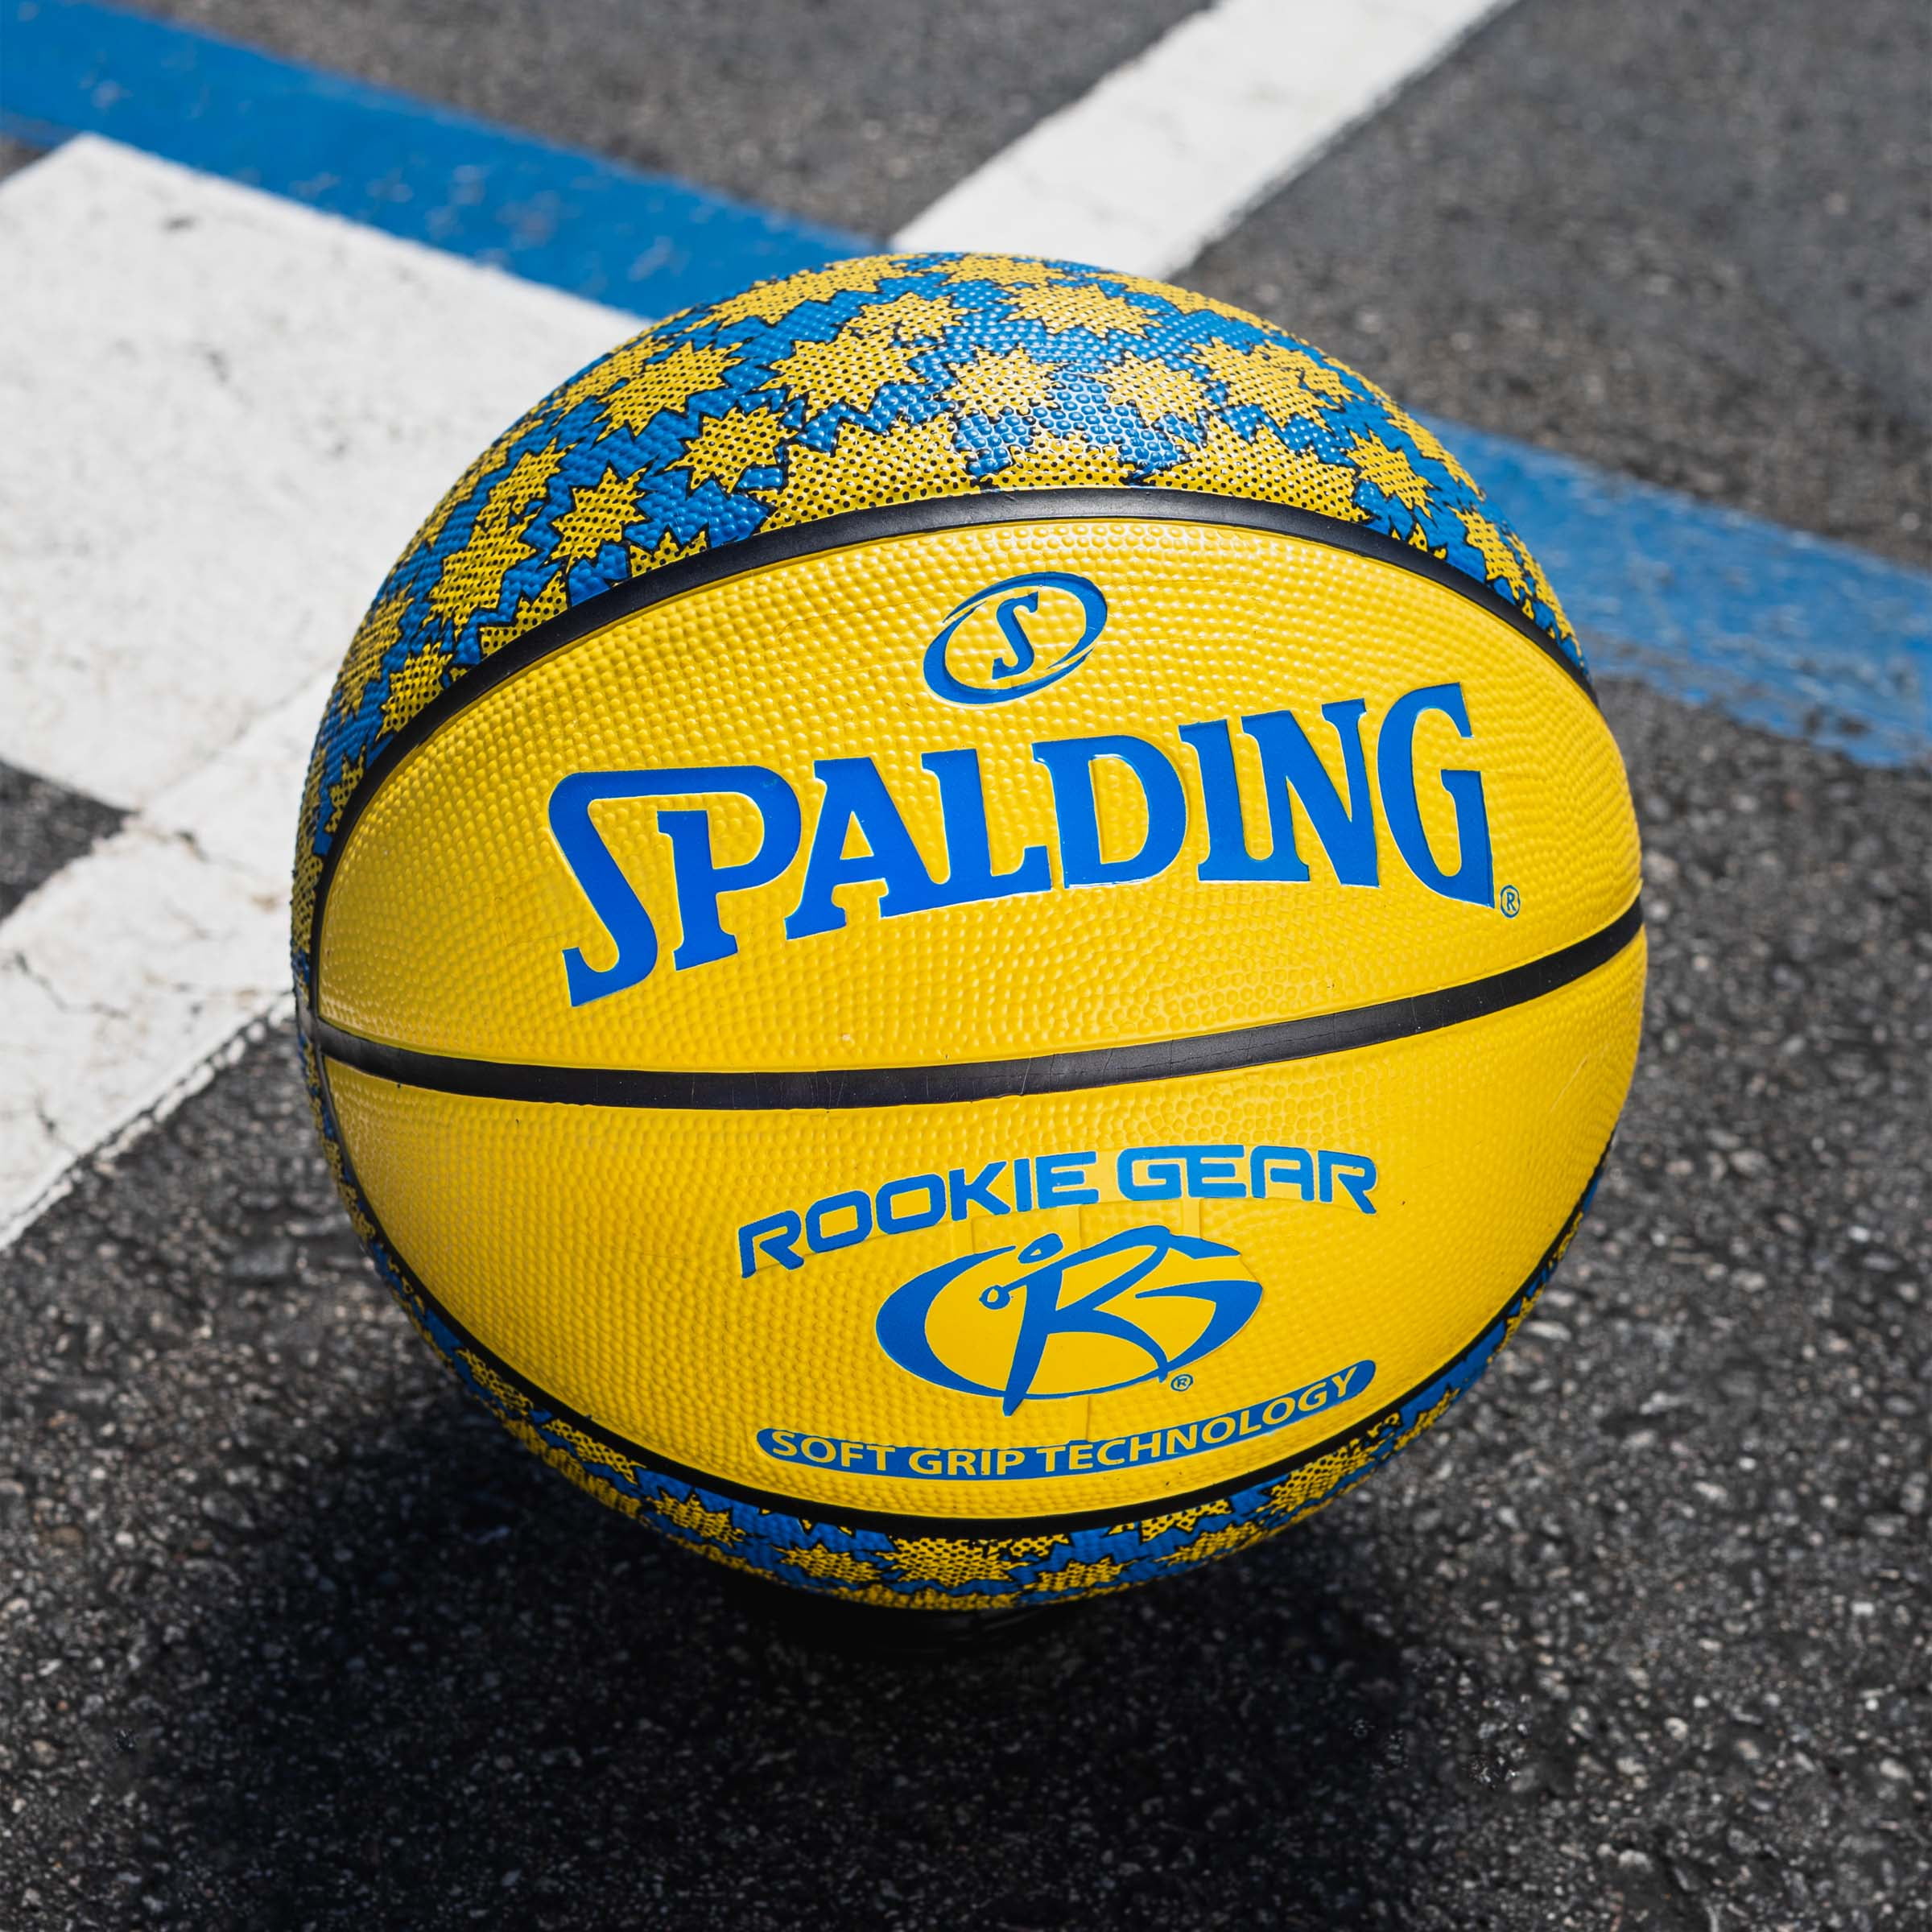 New Other Spalding Spalding NBA Youth Rookie Gear Indoor/Outdoor Baske –  PremierSports